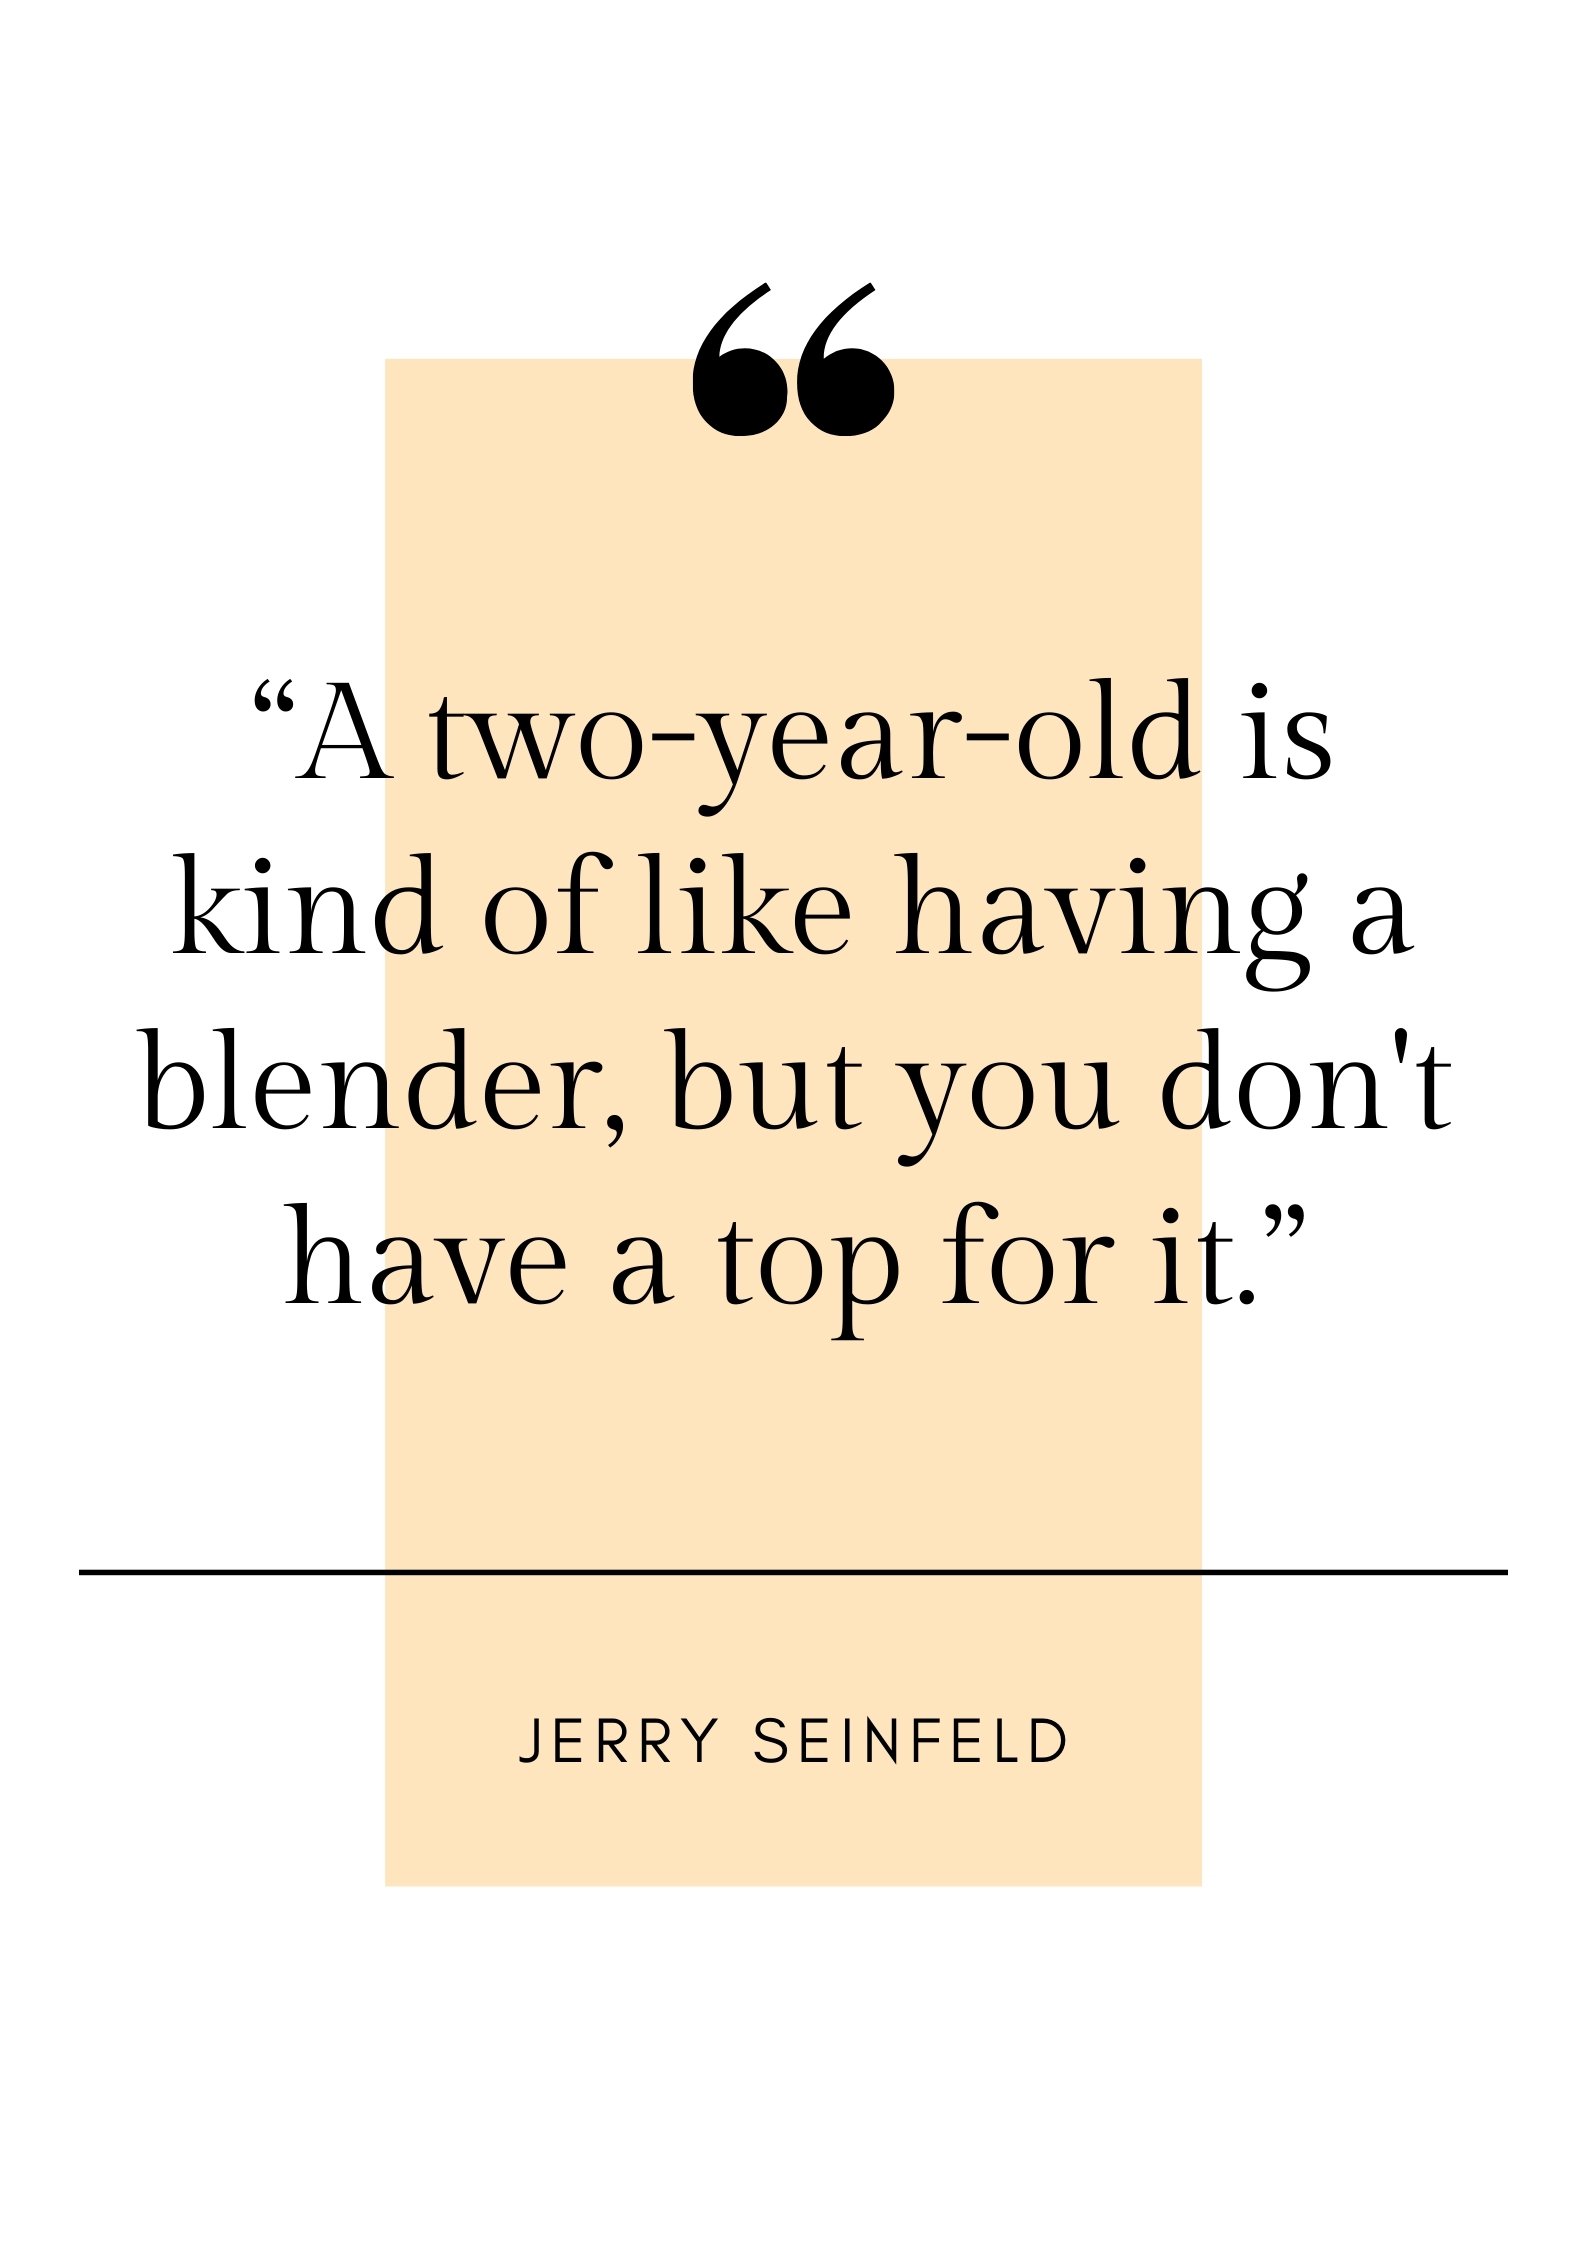 jerry seinfeld quote